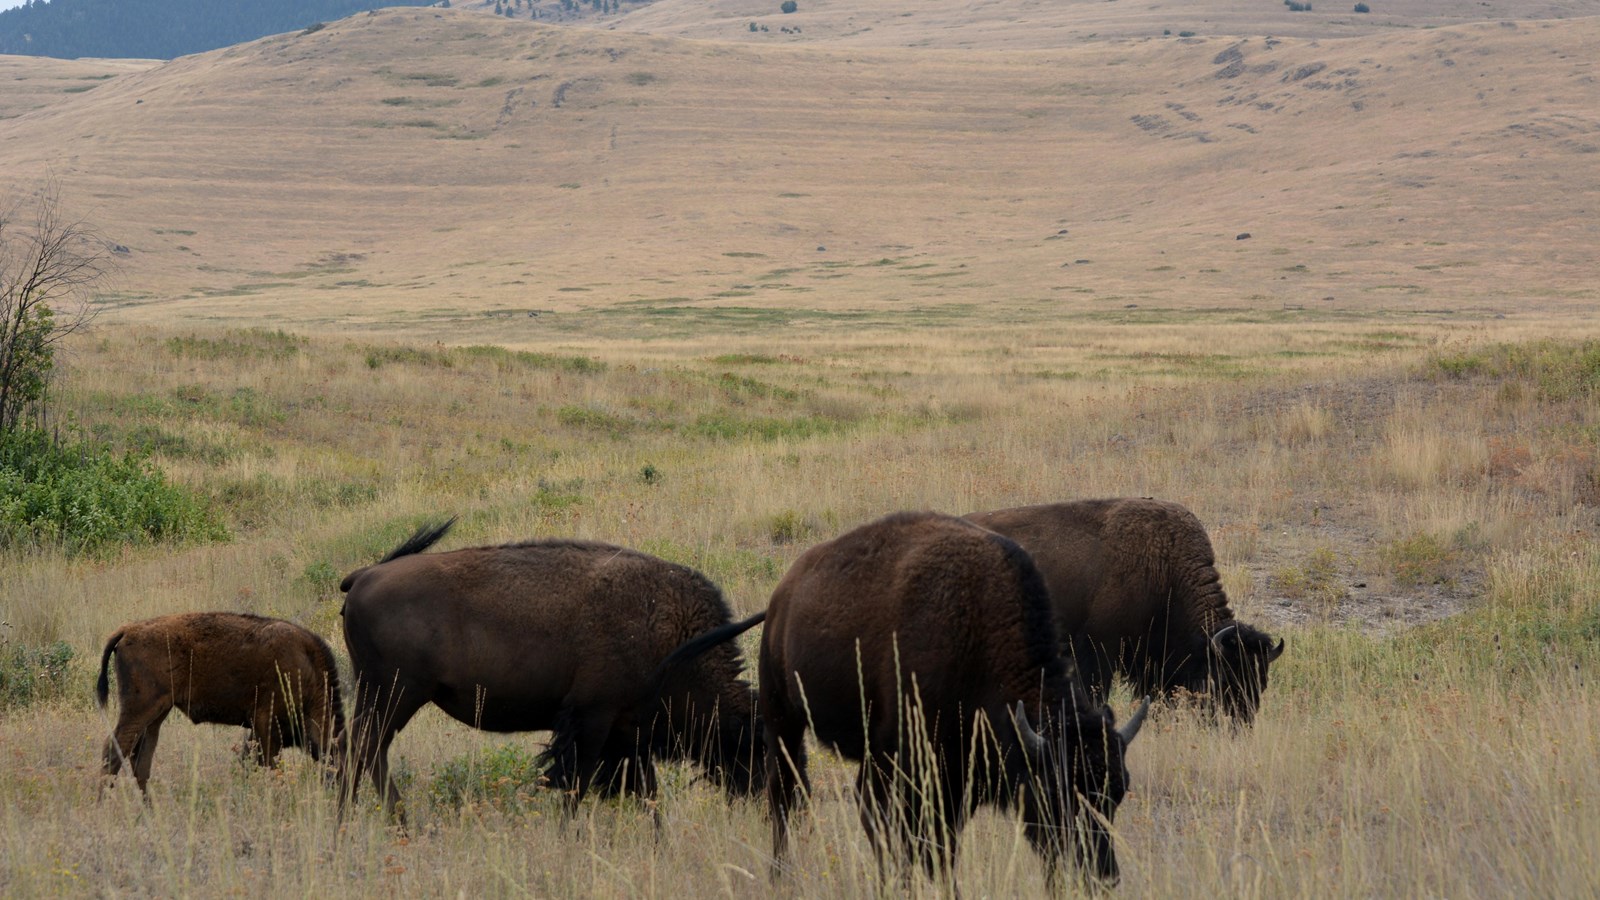 Four bison eating grass in front of mountains with lake strandlines